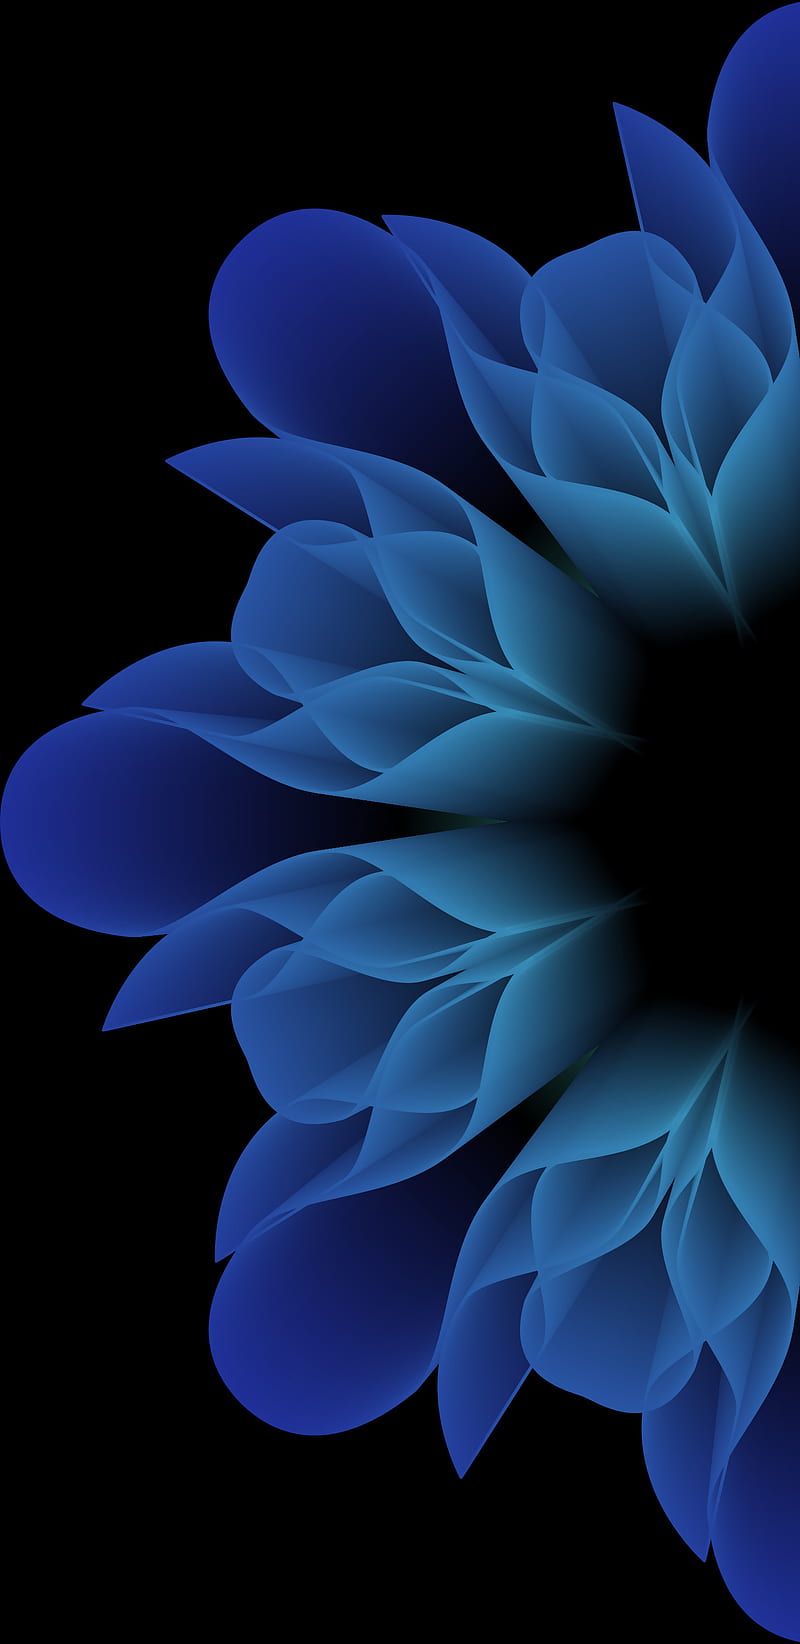 Iphone x flower wallpaper - Download for free now